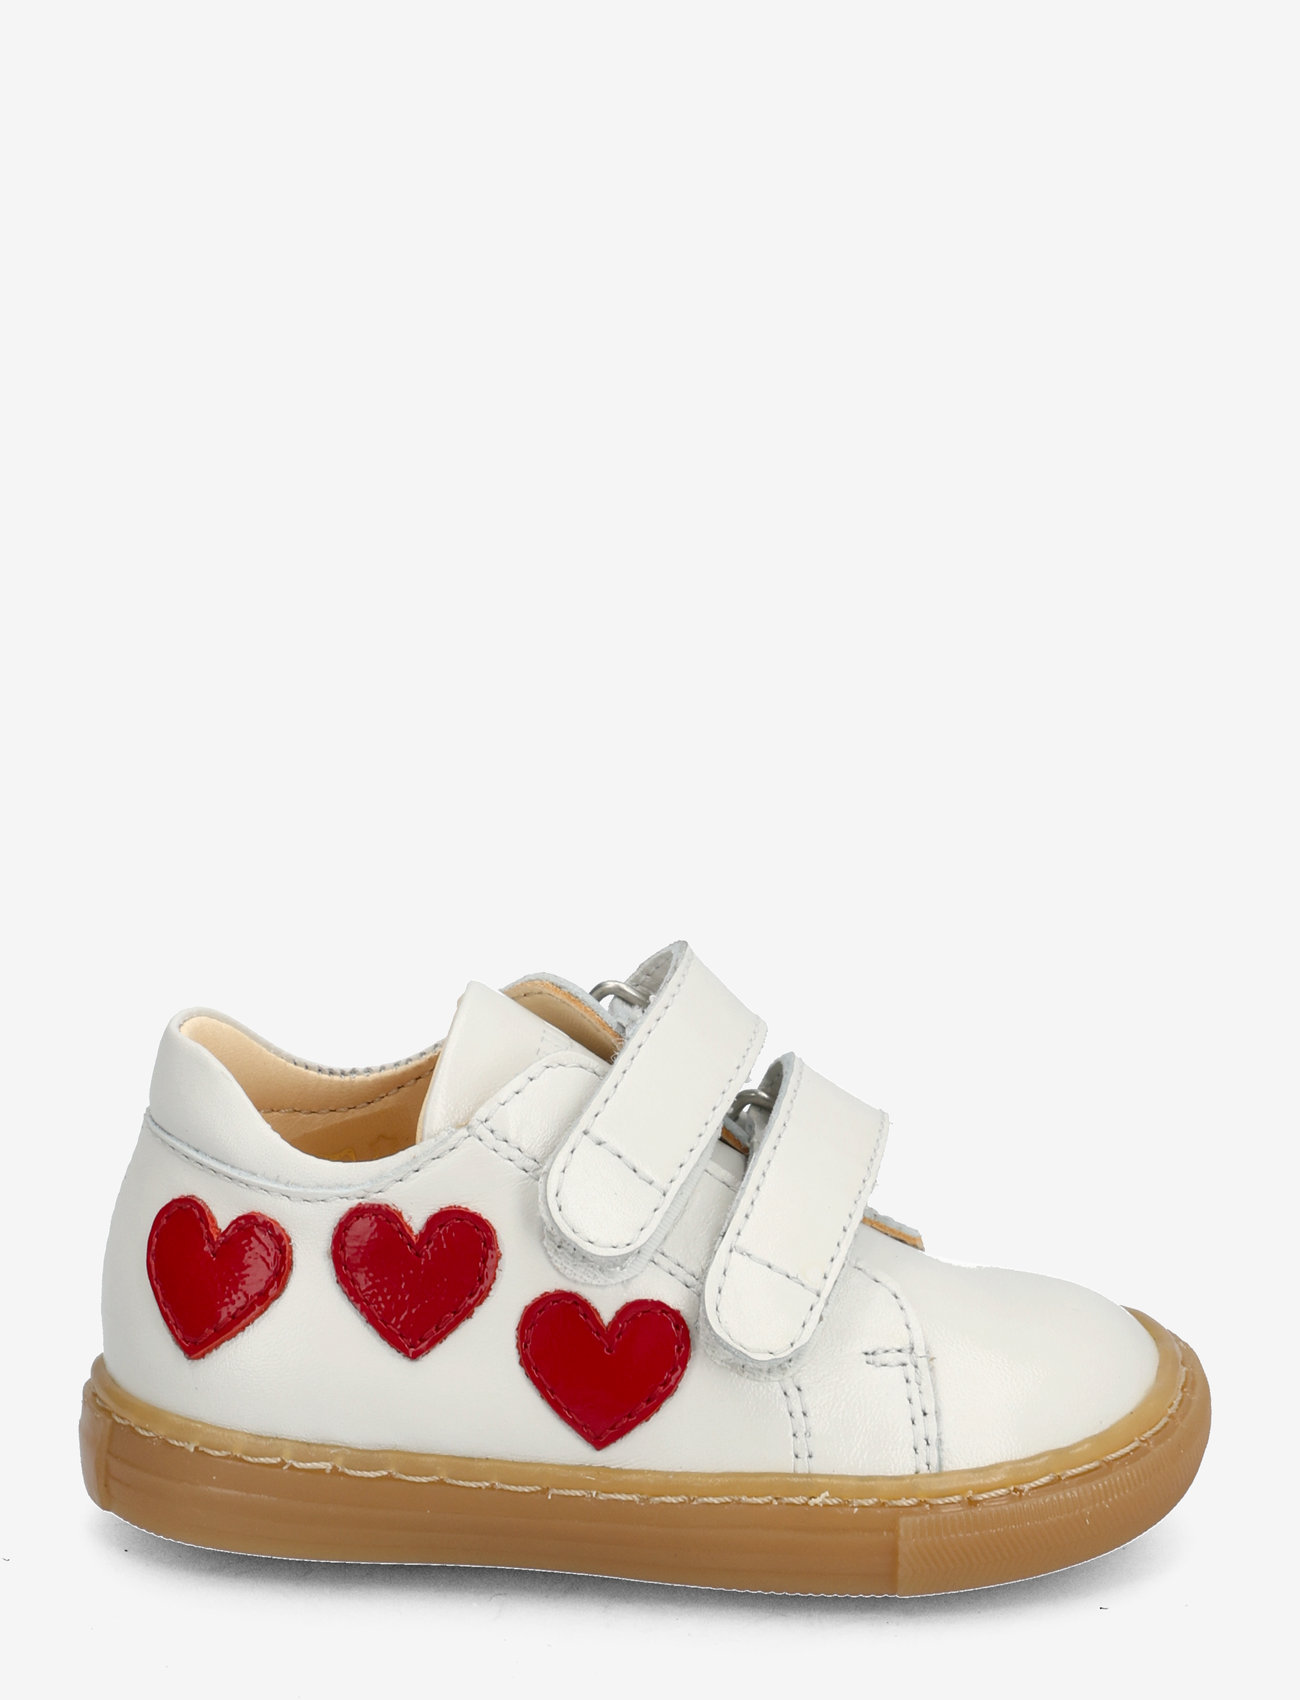 ANGULUS - Shoes - flat - with velcro - summer savings - 1493/a003 off white/hearts - 1